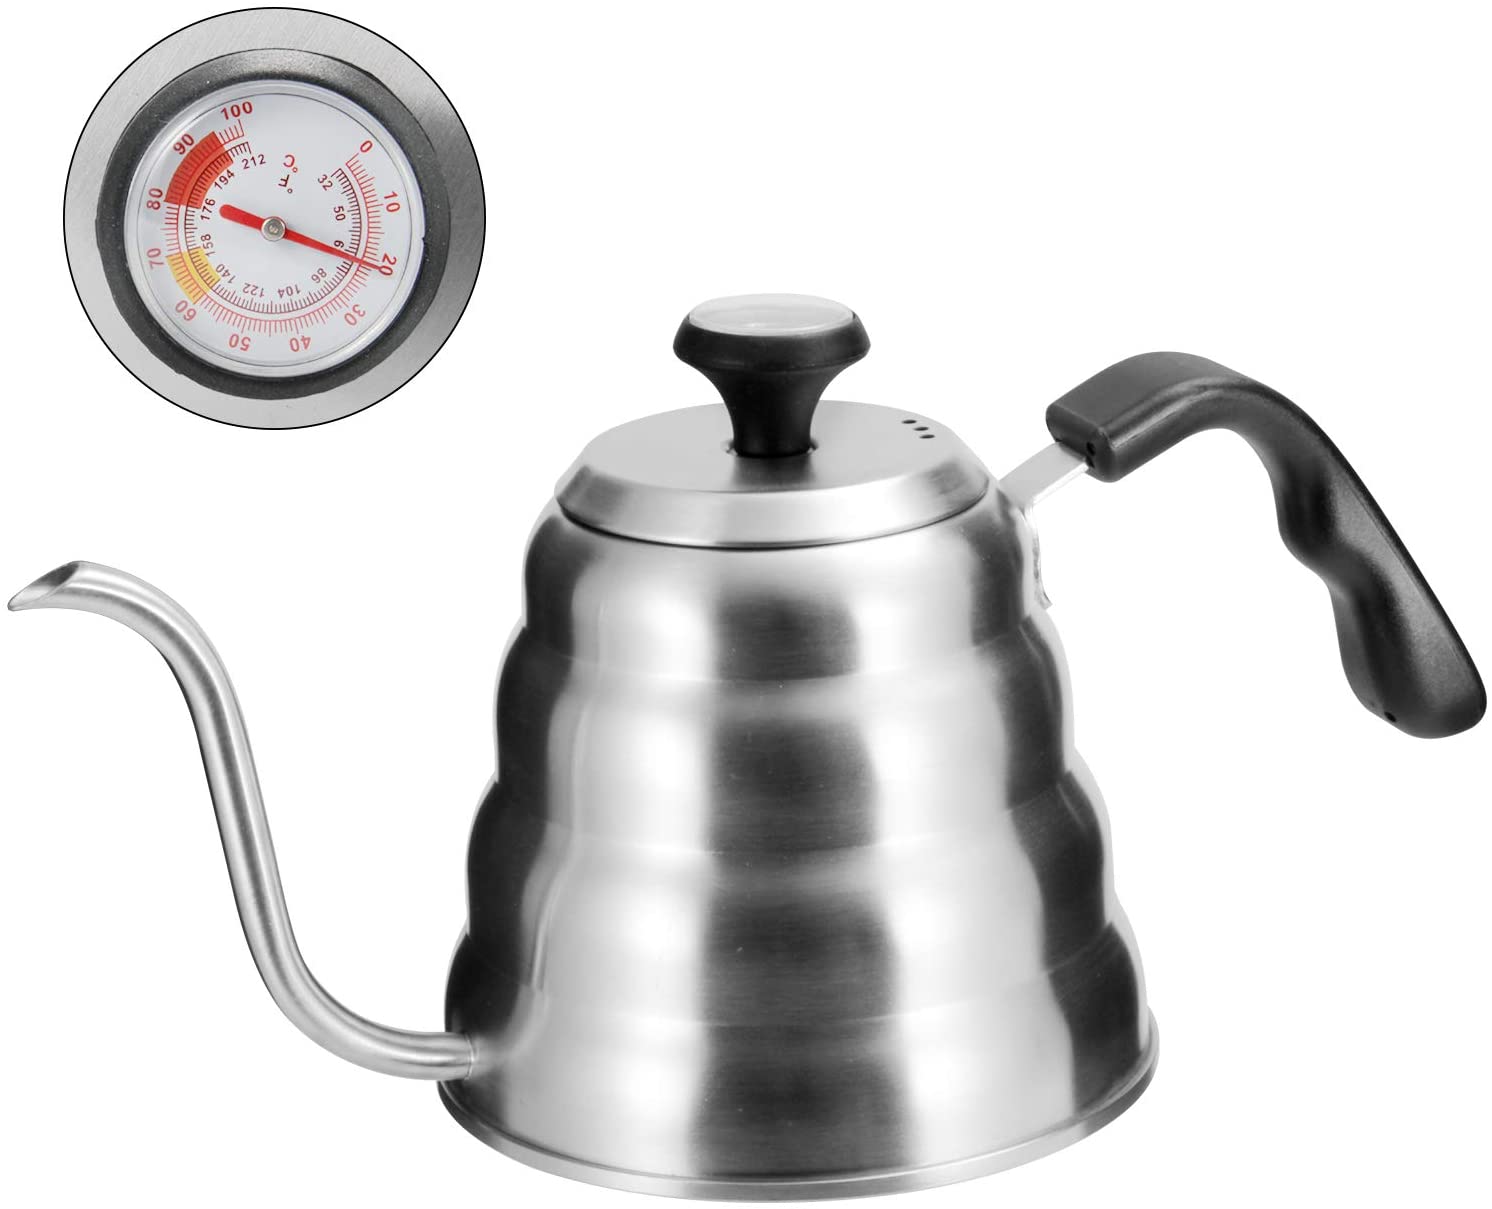 10. Stainless Steel Gooseneck Pour Over Coffee Kettle 